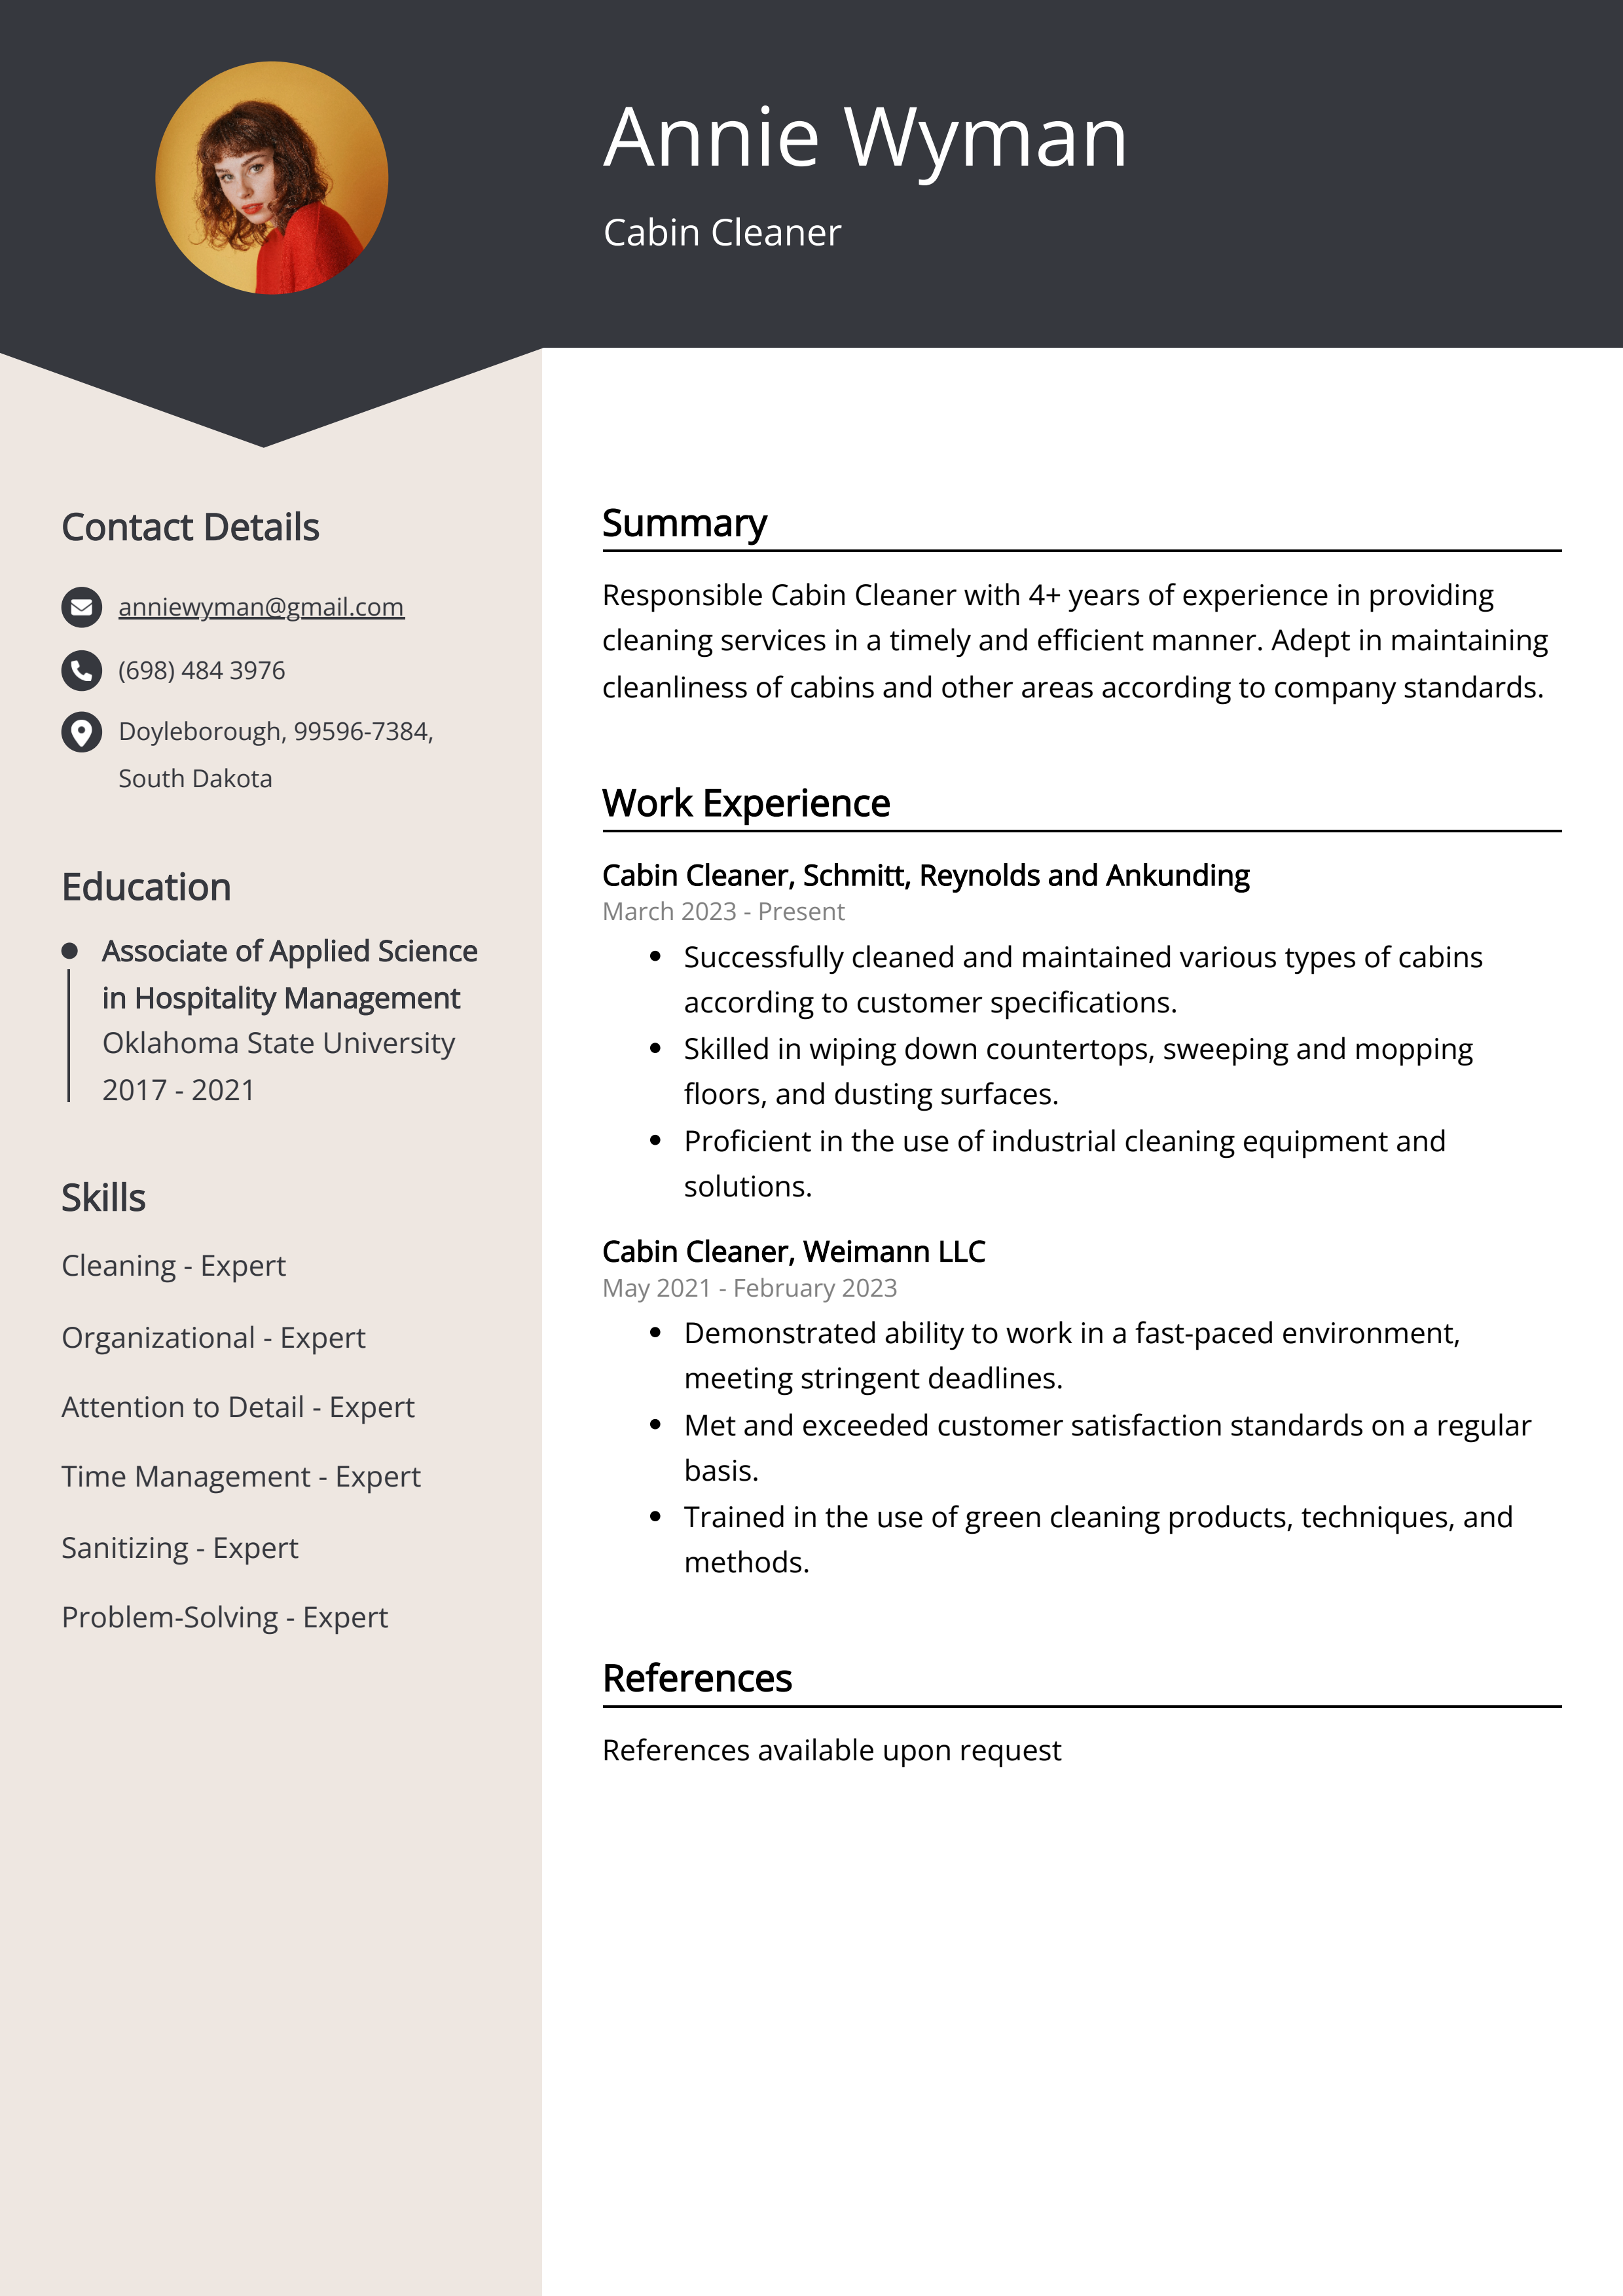 Cabin Cleaner Resume Example